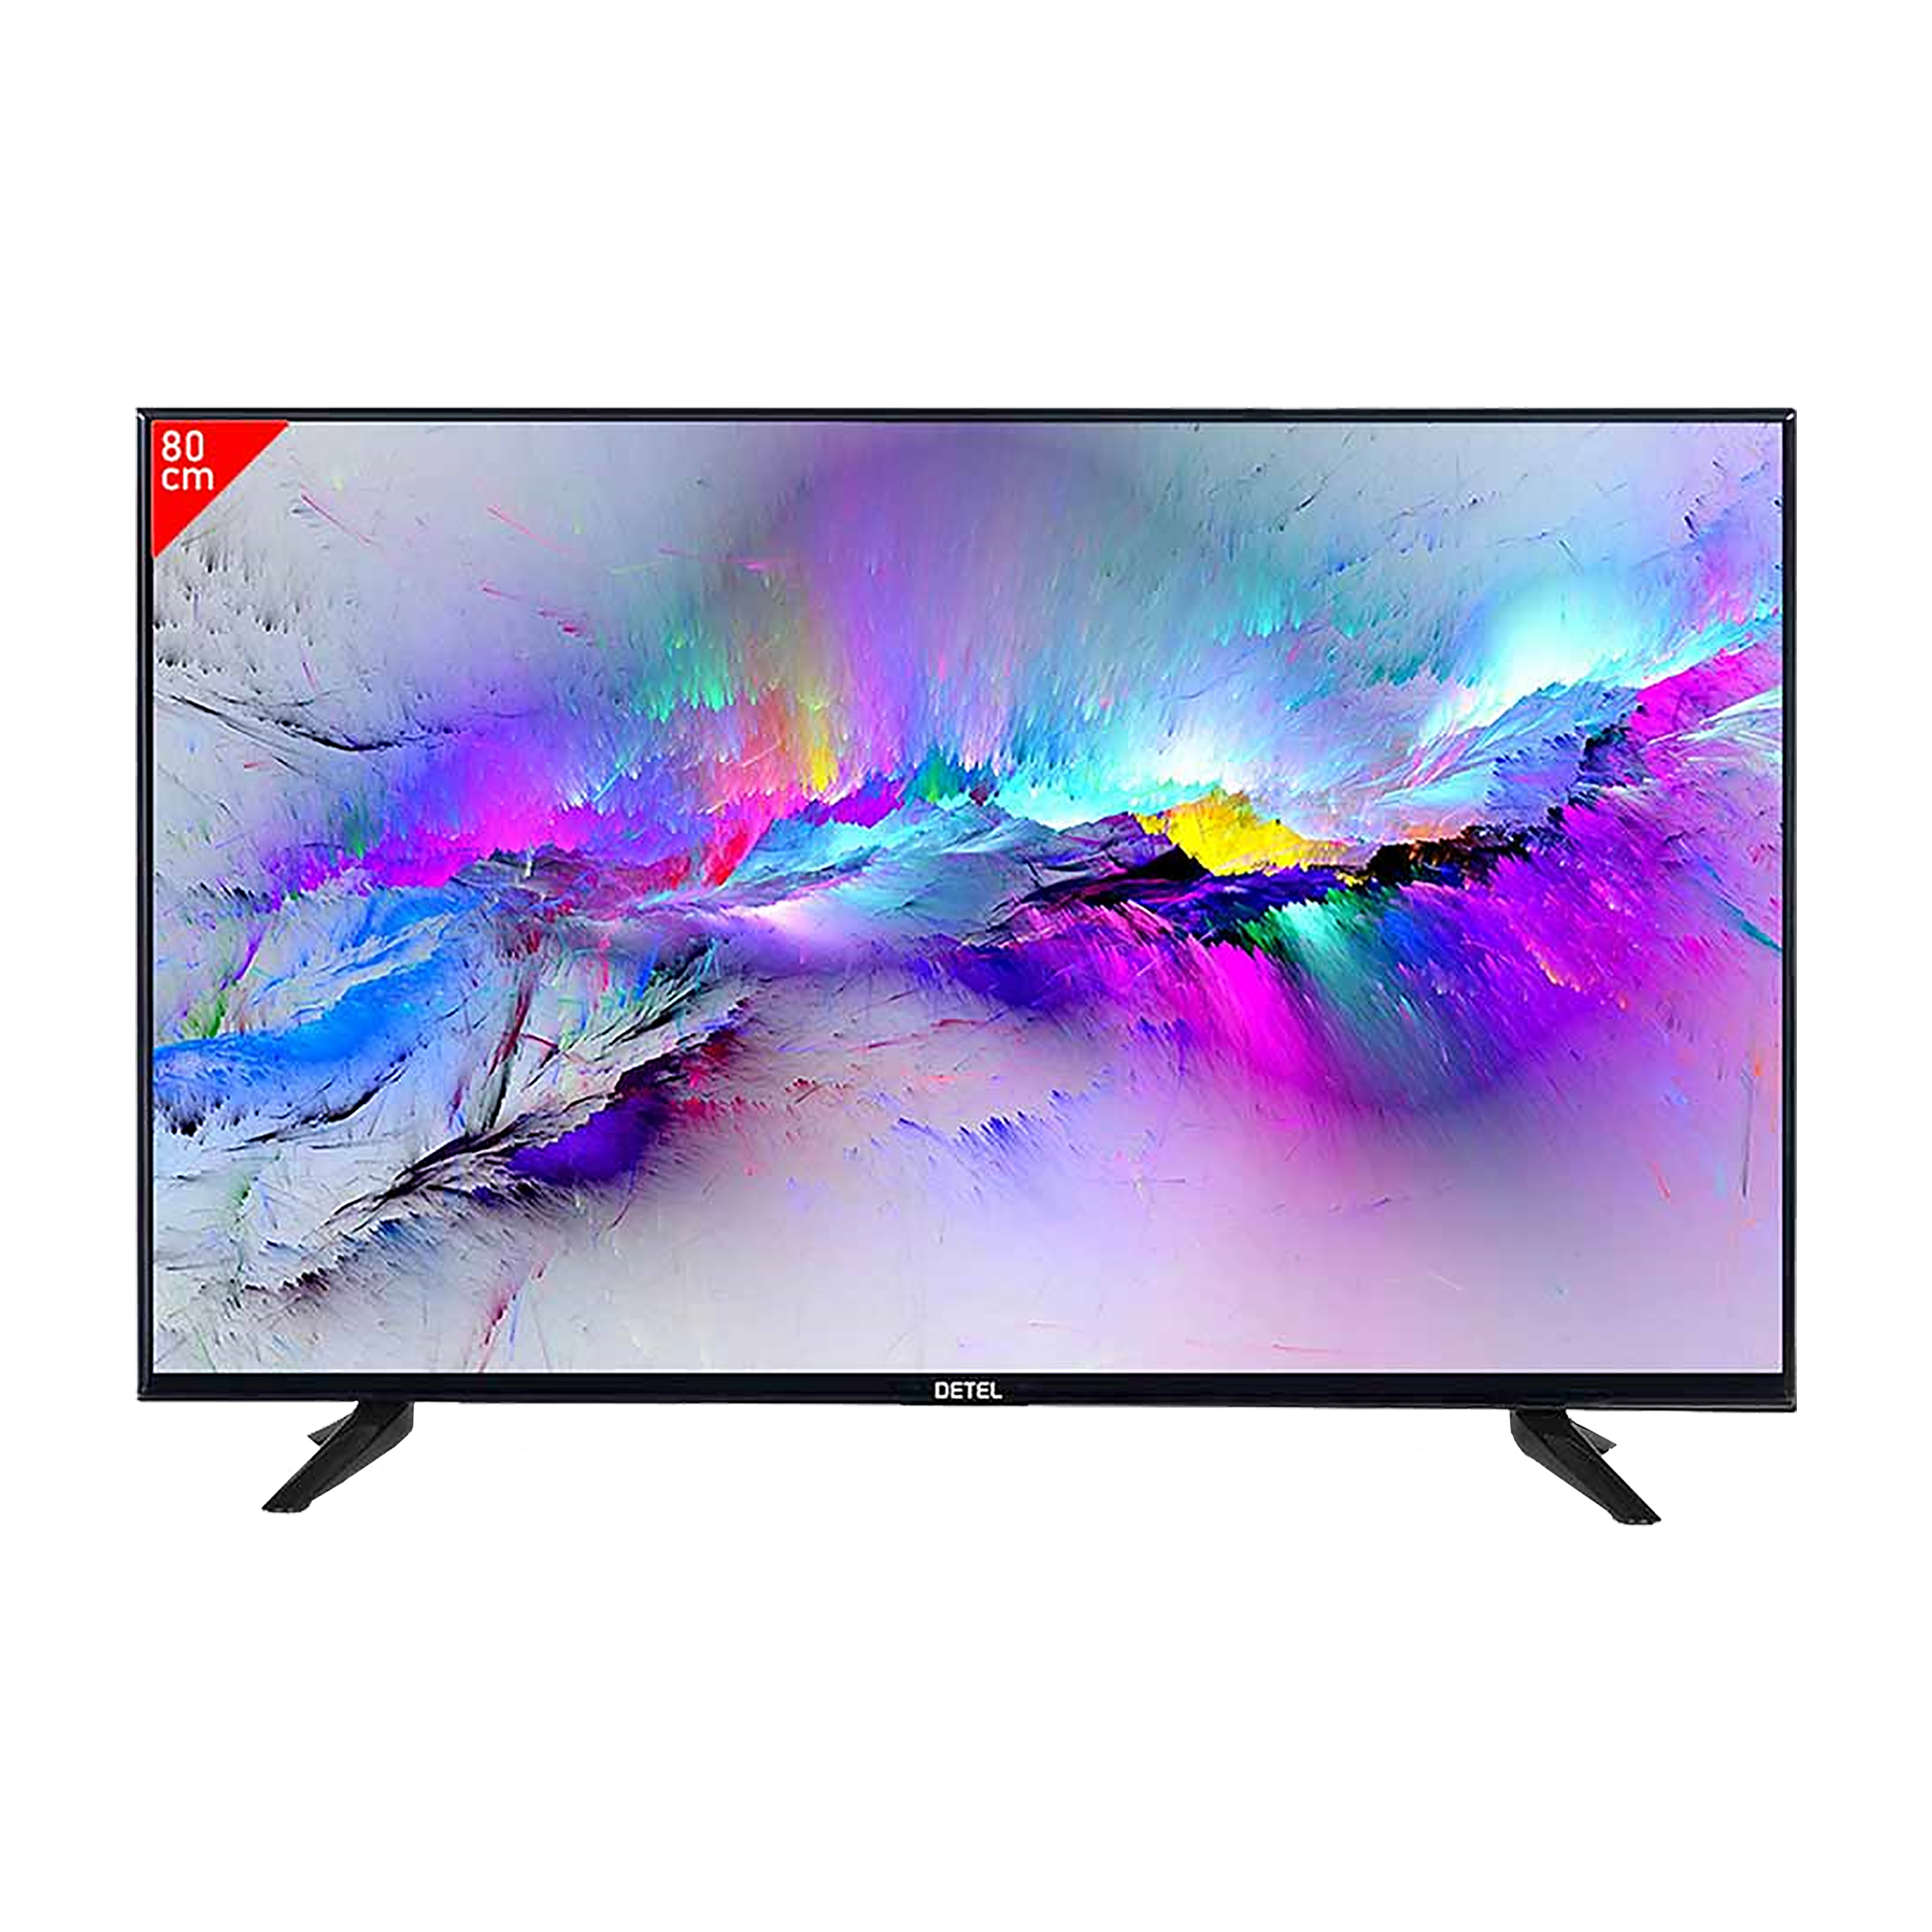 Northern Shine Compound Buy Detel 81.28 cm (32 inch) Full HD LED TV Online - Croma